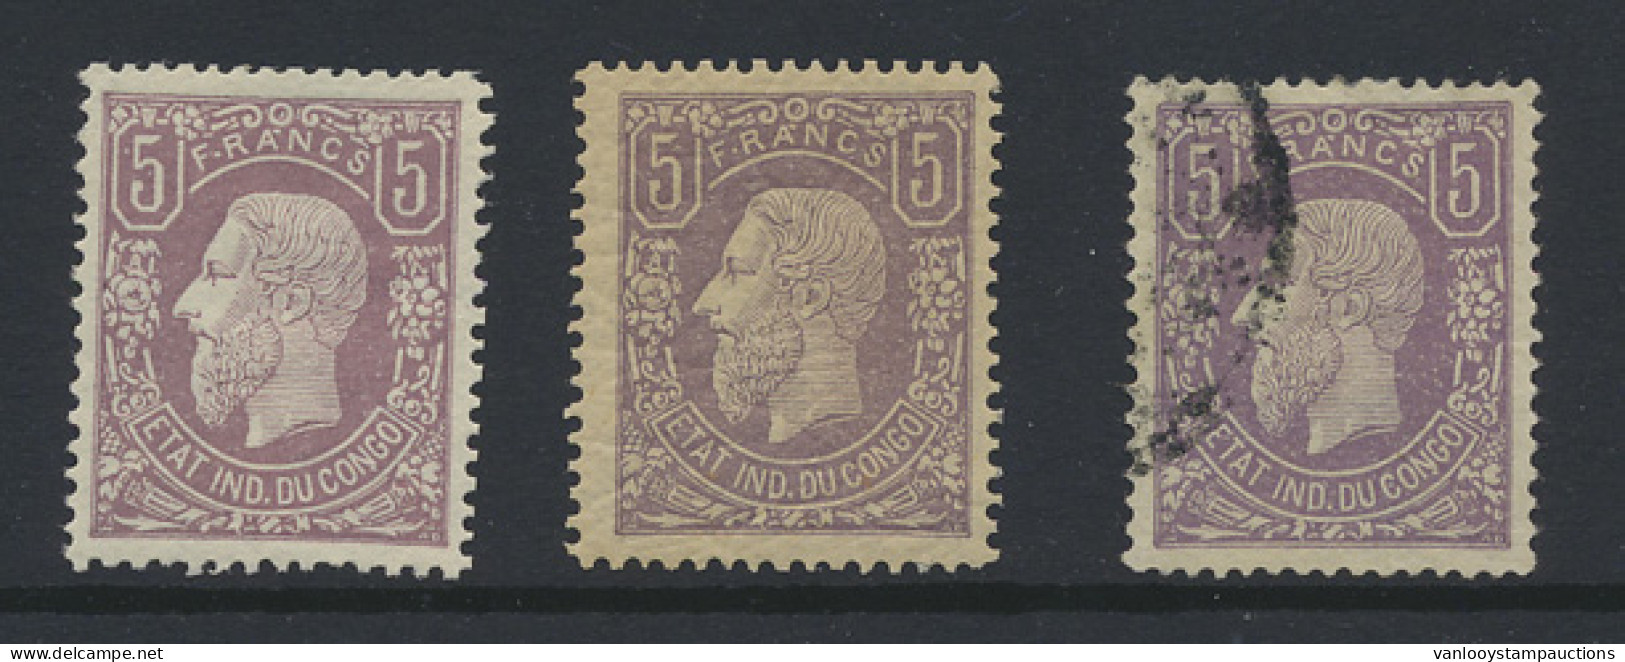 */0 Type N° 5 '5 Fr Lilac- FORGERY' (3x) 2x Unused With Glue And 1 Cancelled, VF/F/to Be Checked. - 1884-1894